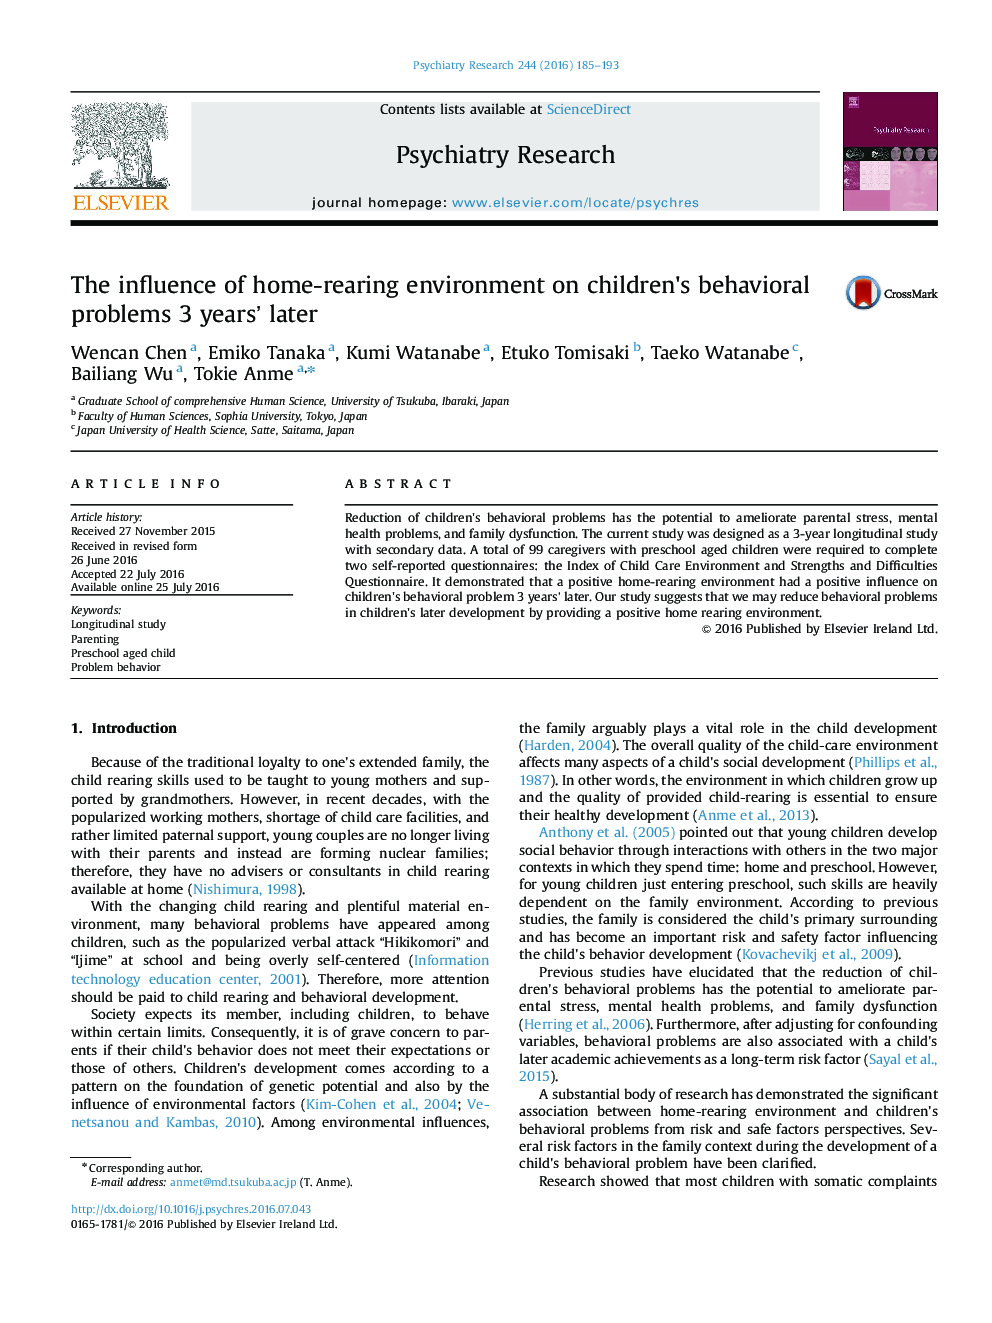 The influence of home-rearing environment on children's behavioral problems 3 years’ later